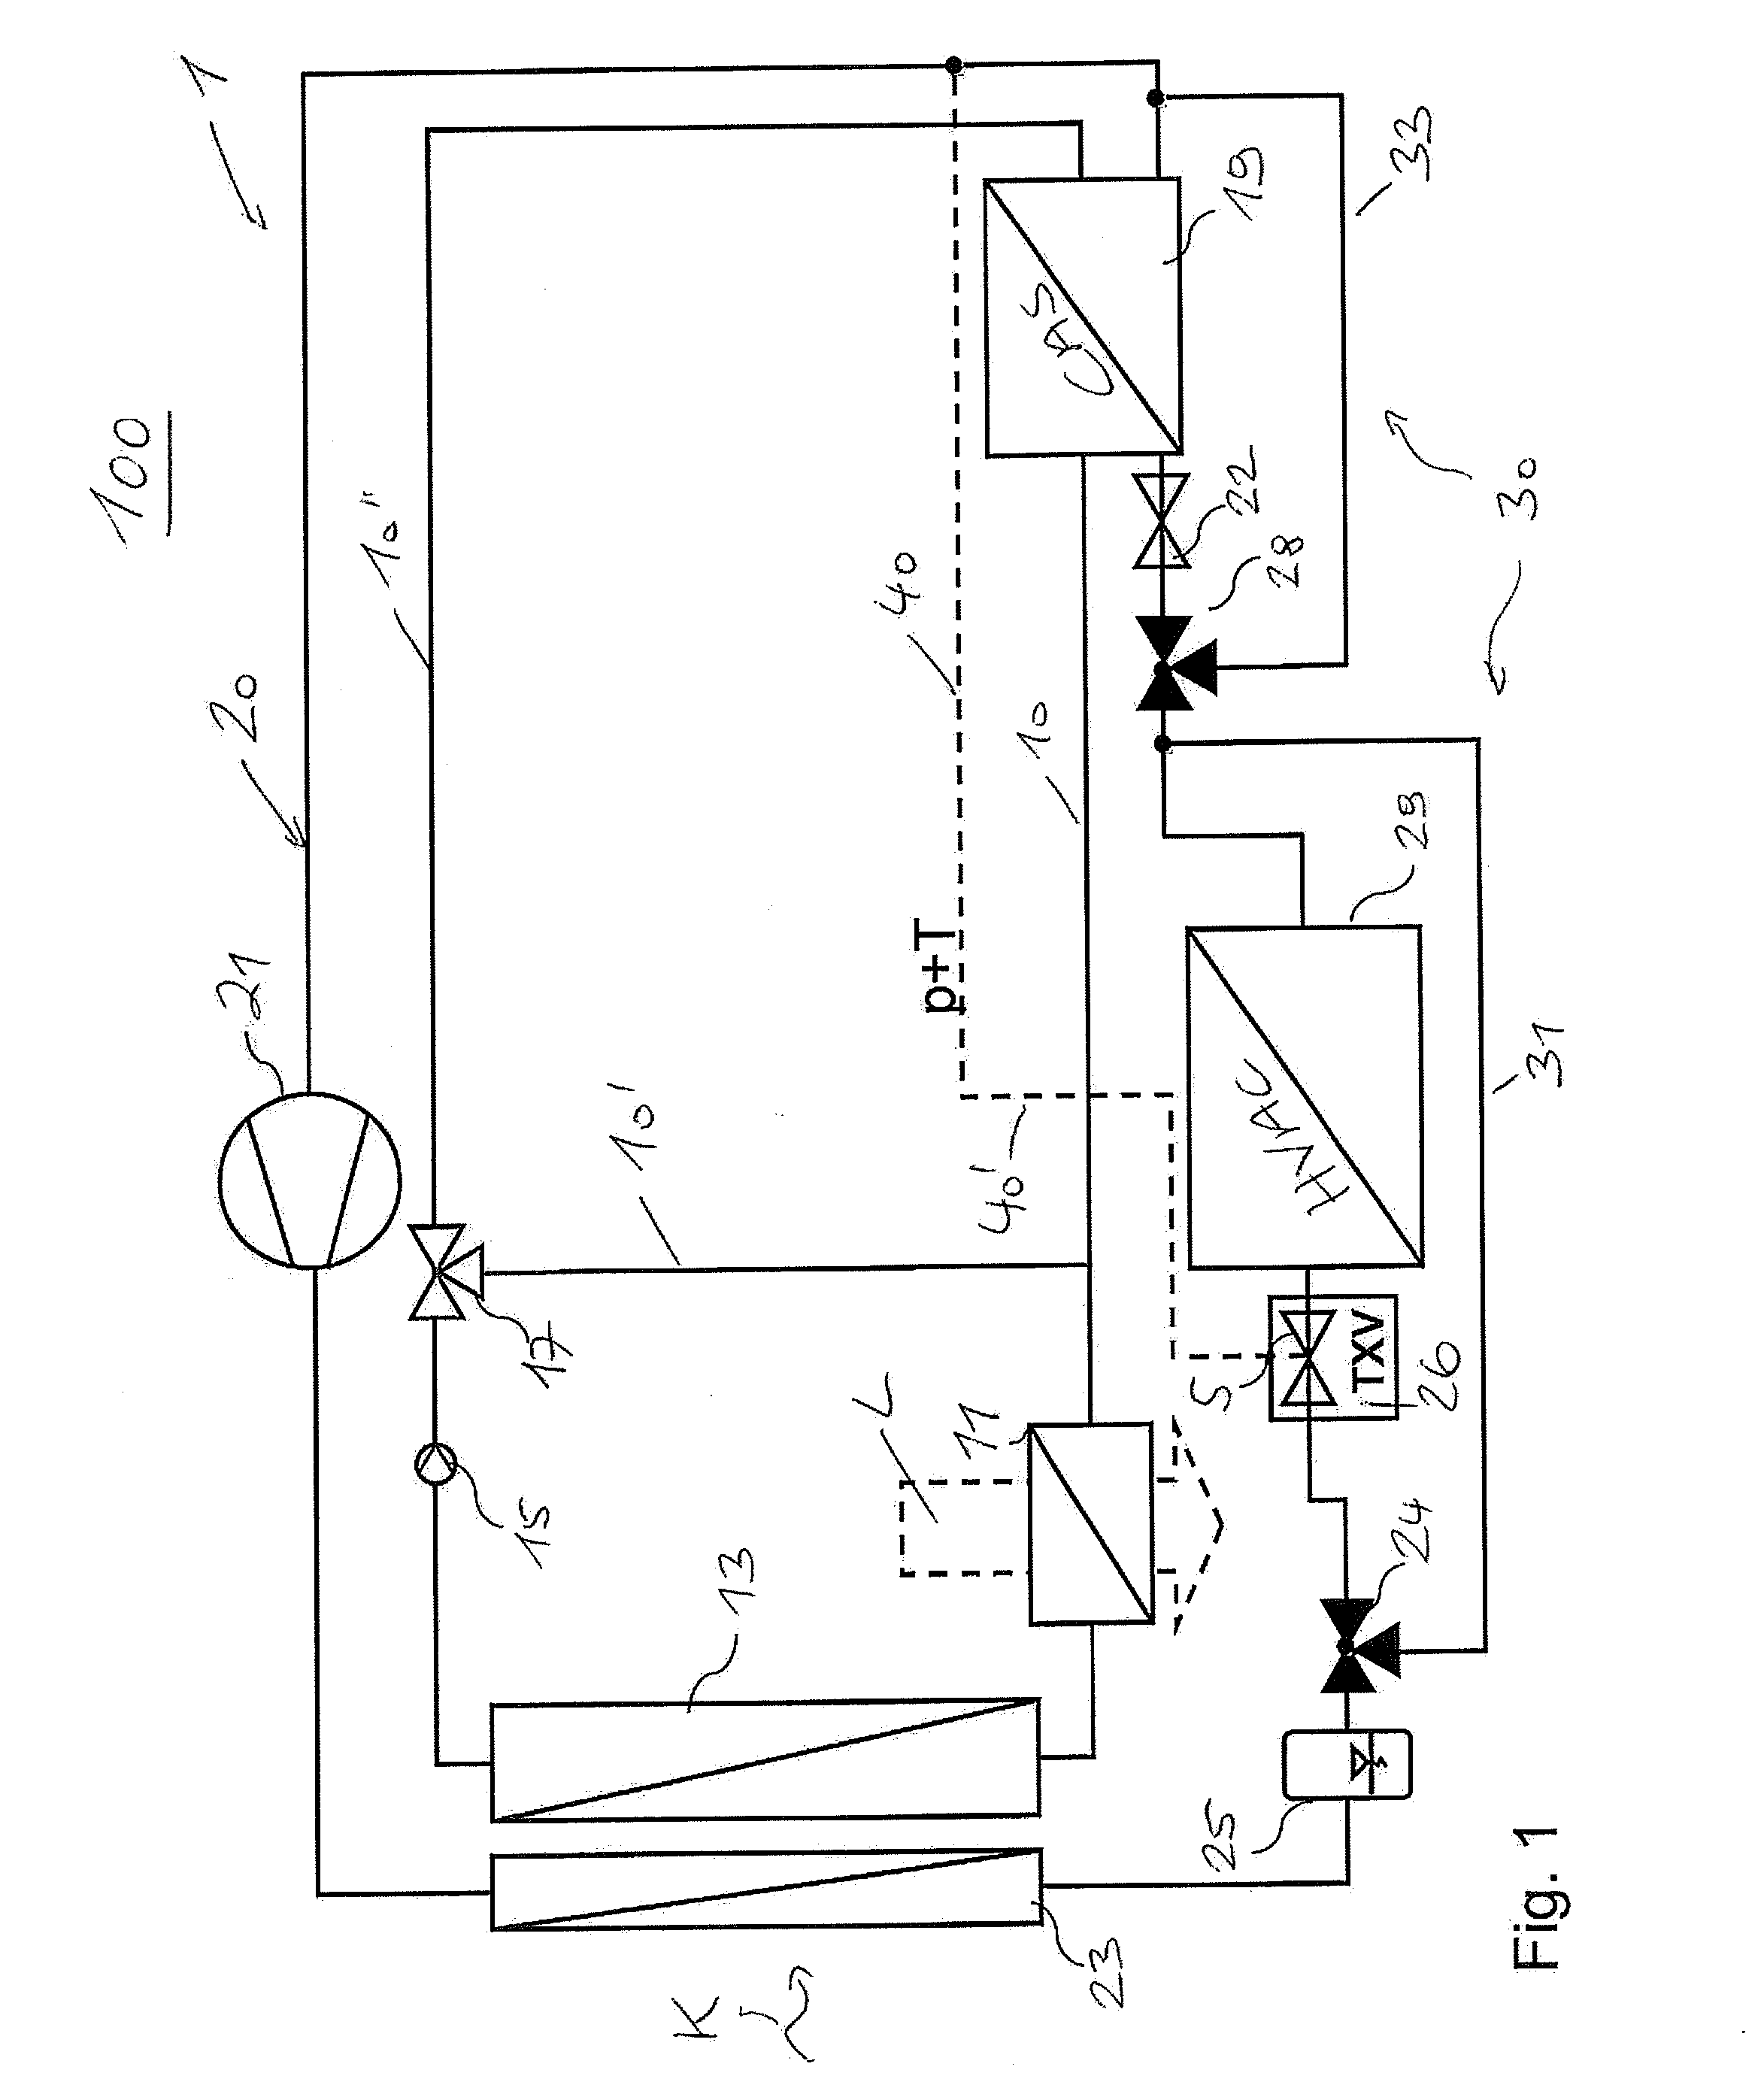 Device for cooling a coolant, circuit for charging an internal combustion engine, and method for cooling a substantially gaseous charging fluid for charging an internal combustion engine